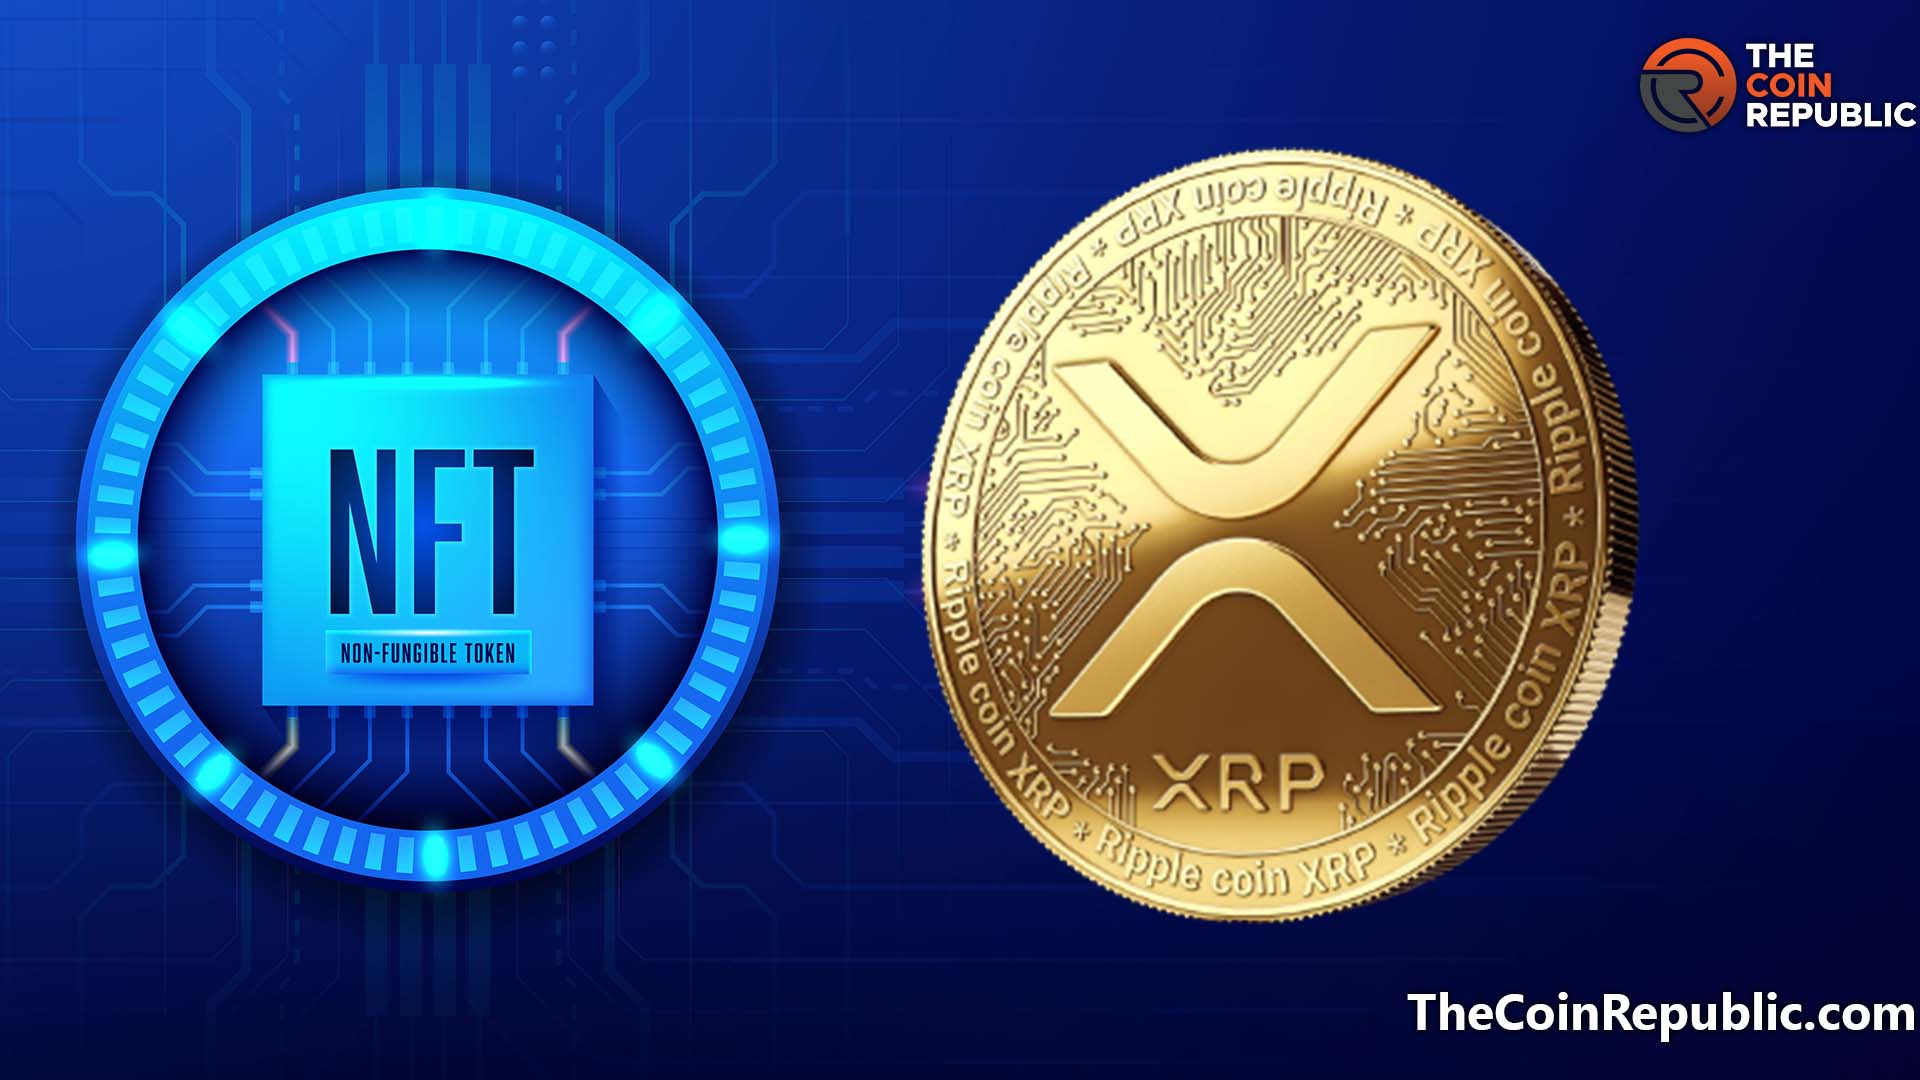 See Details Here: The New Record With XRP used in XRPL NFT